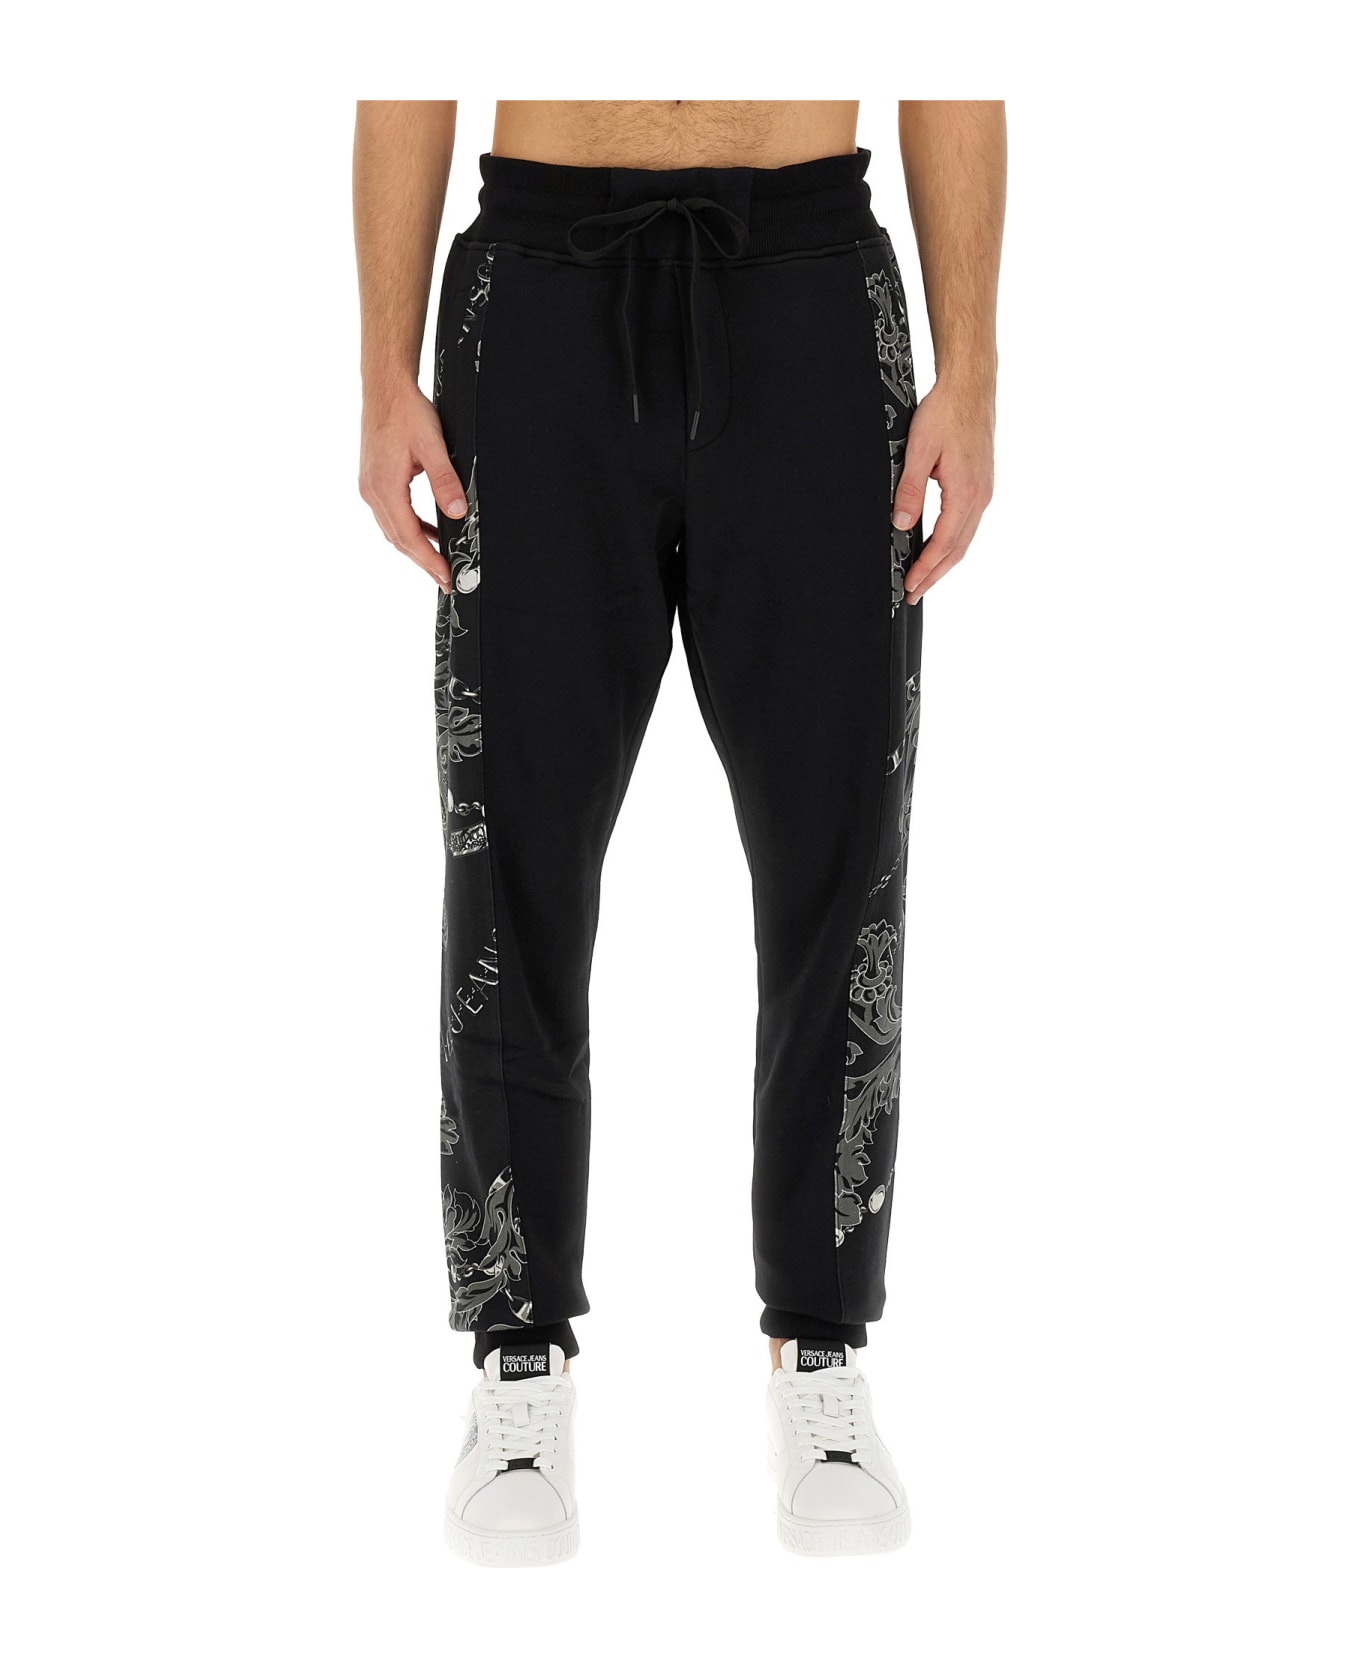 Versace Jeans Couture Chain Couture Jogging Pants - NERO